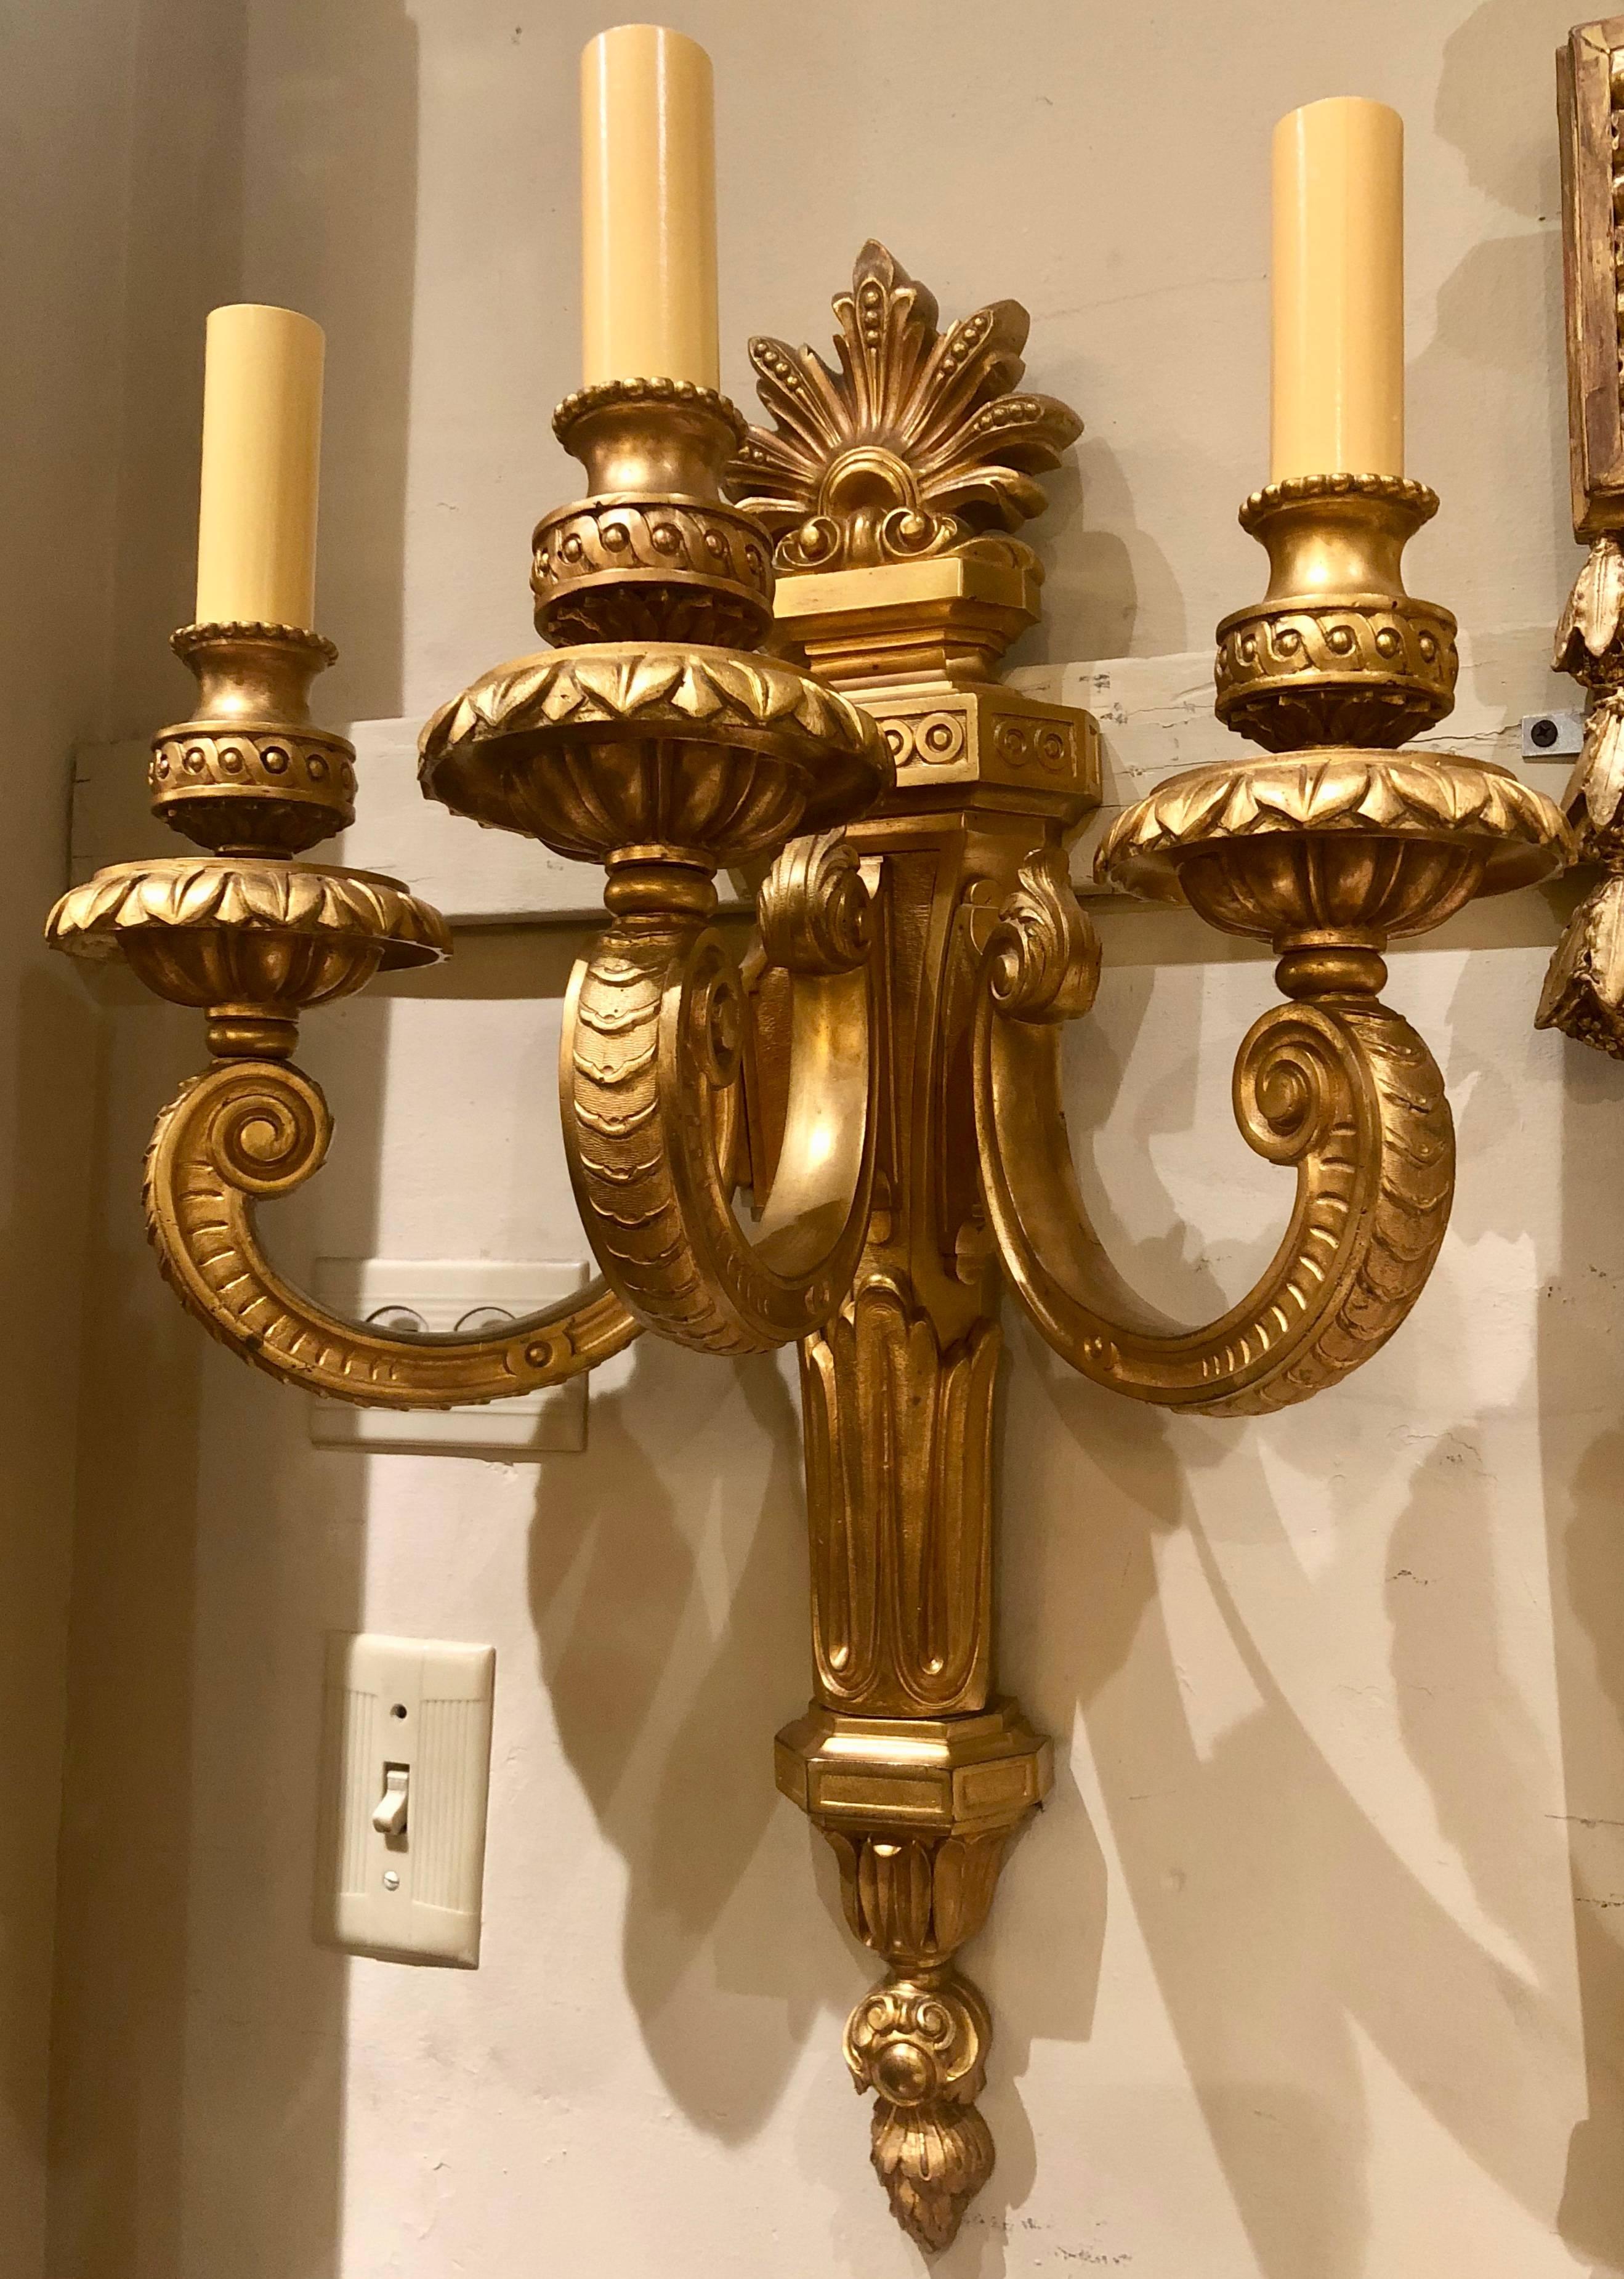 These large sconces are wonderful.